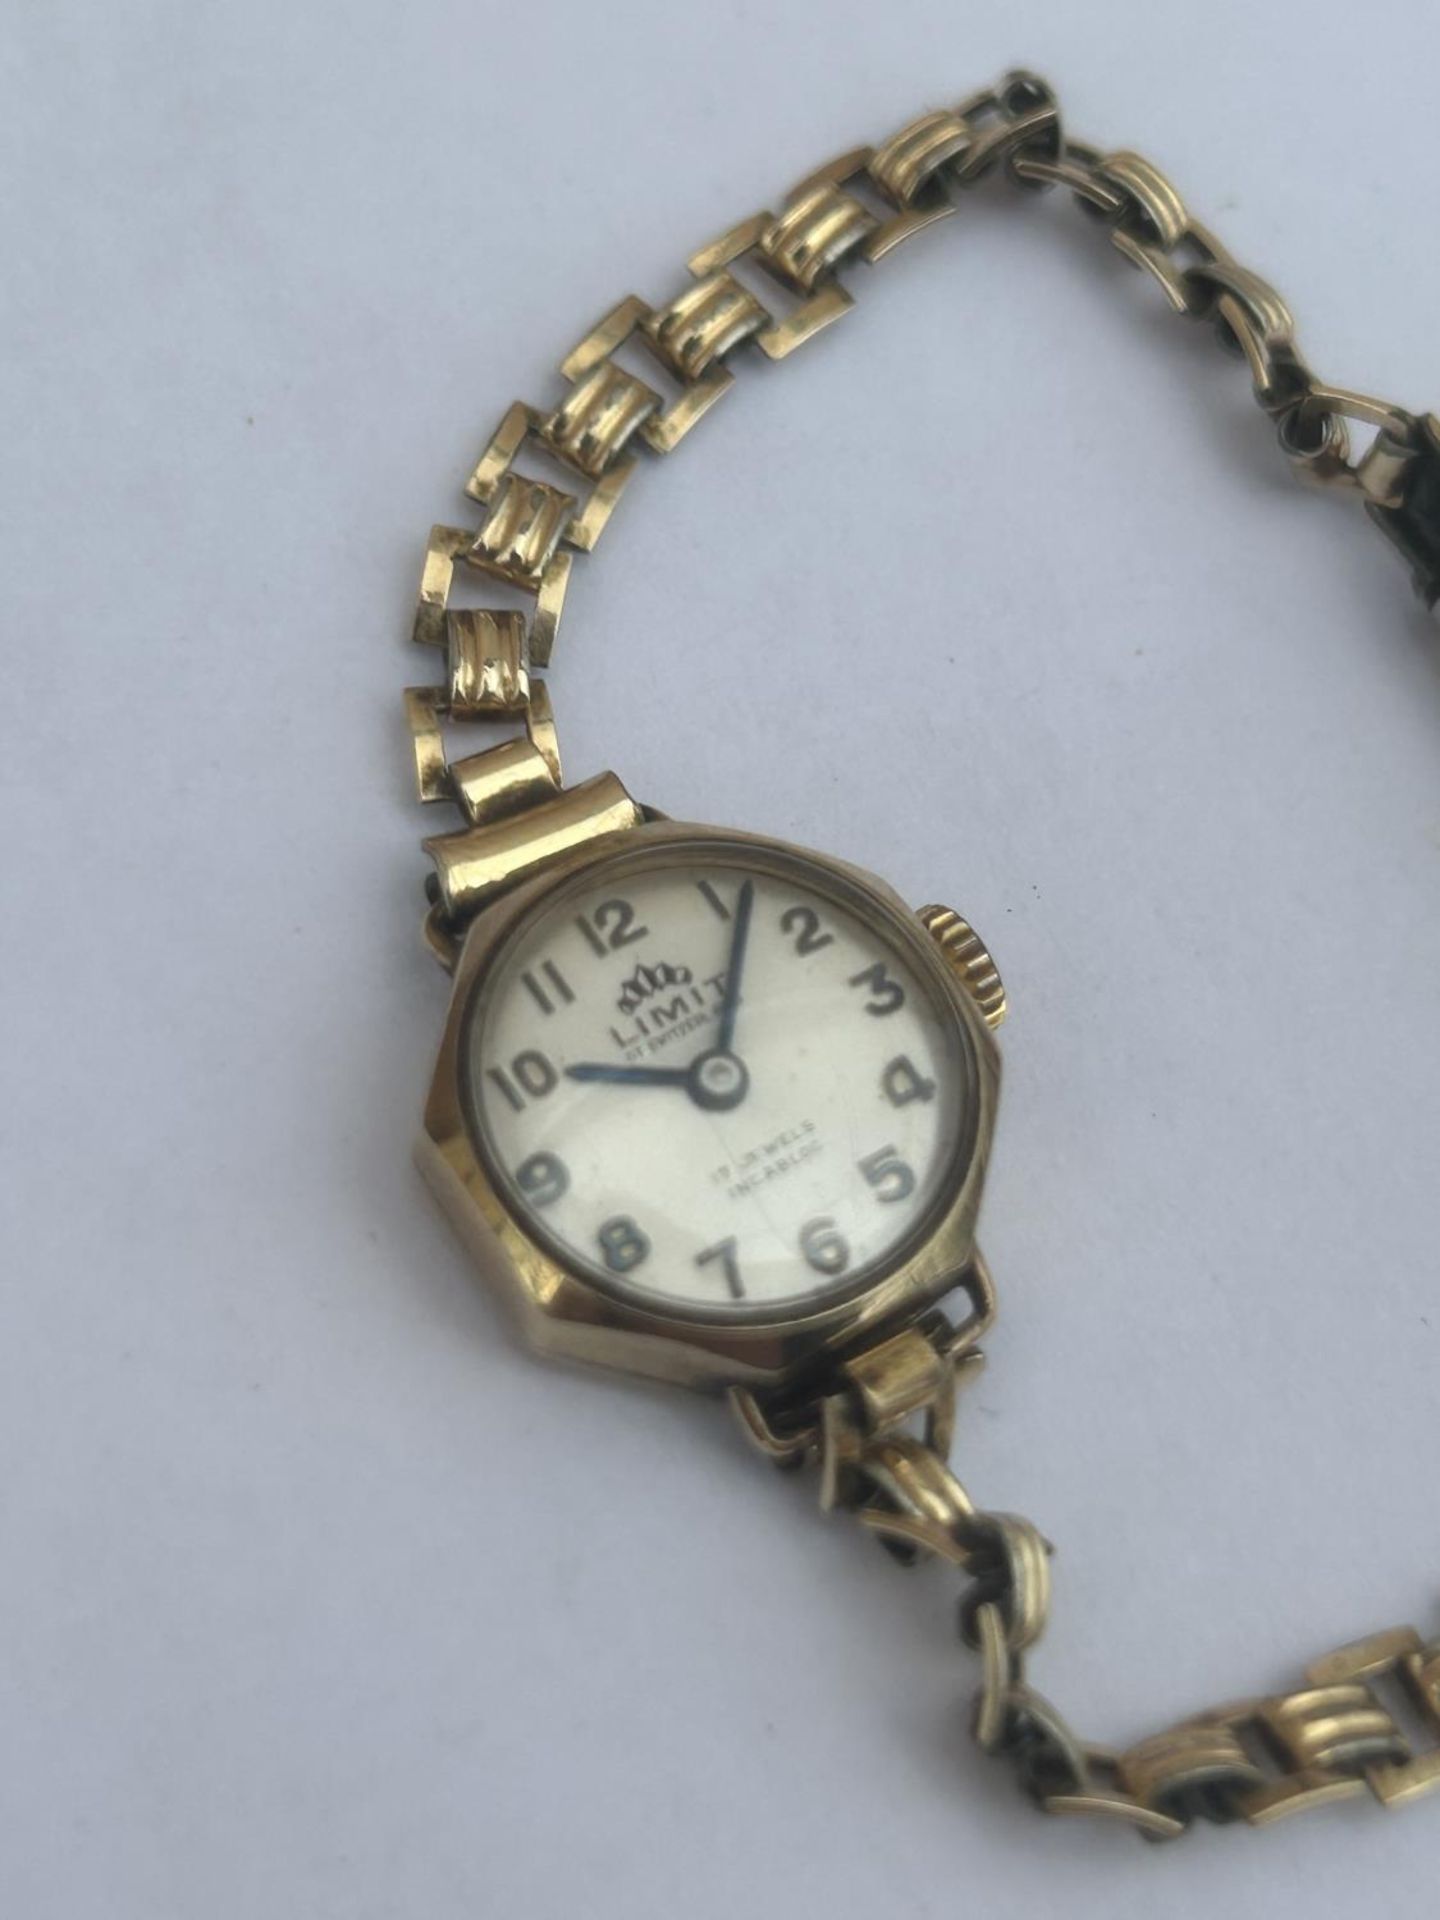 A 9CT GOLD CASED LADIES LIMIT OF SWITZERLAND WATCH, WITH 17 JEWEL MOVEMENT - Image 2 of 3